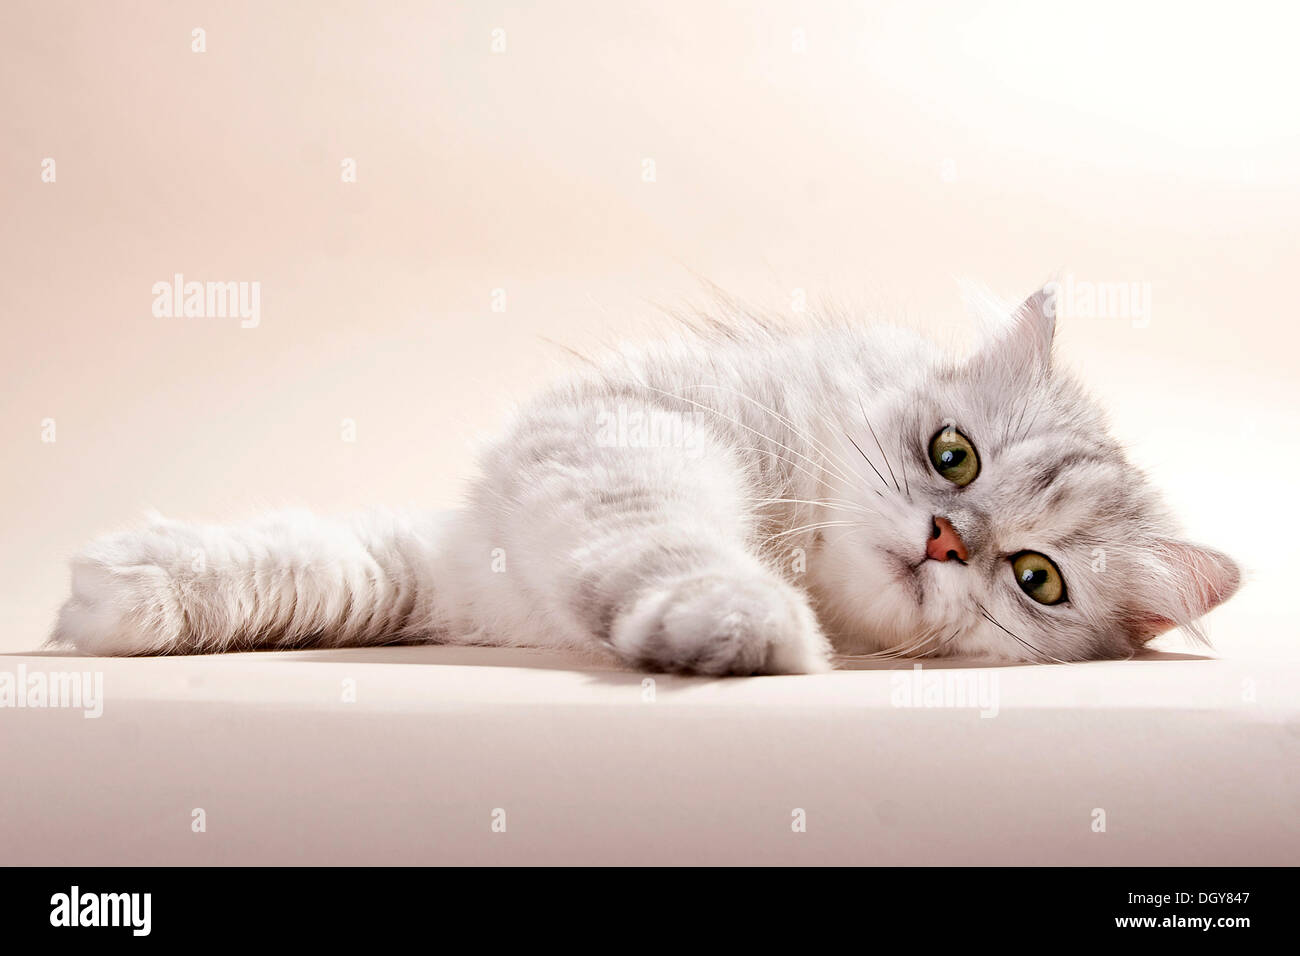 Silver-shaded British longhair cat lying on its side Stock Photo